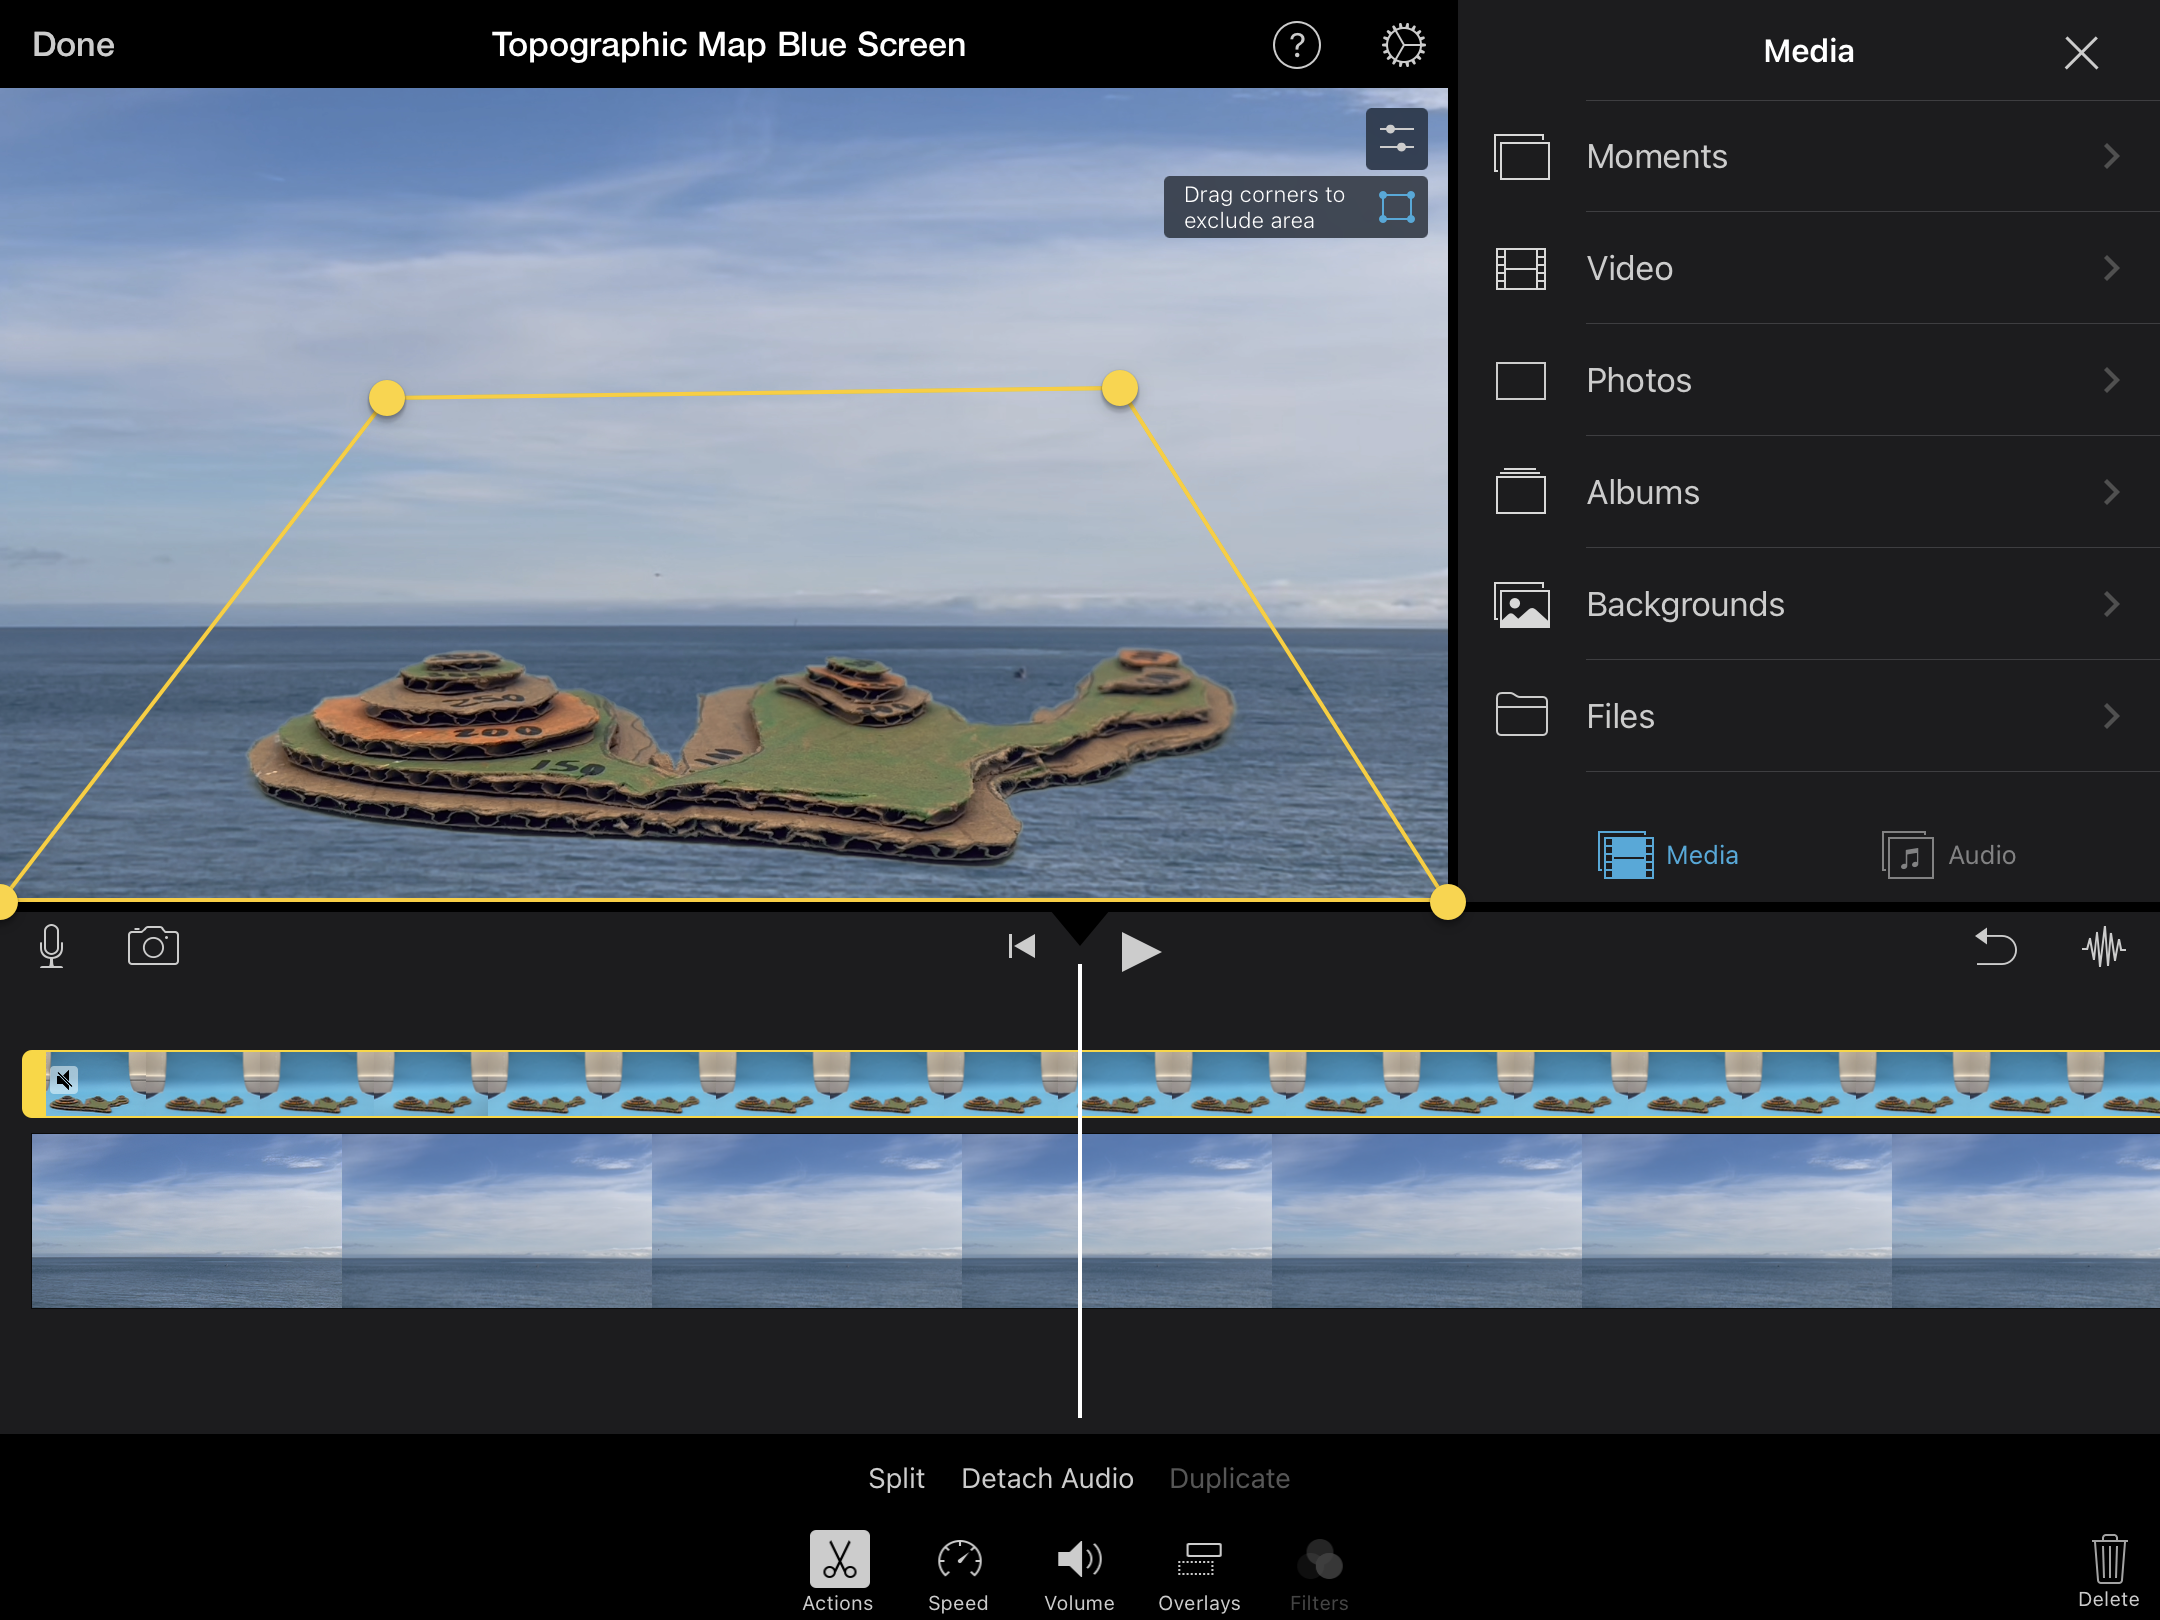 Screenshot from iMovie for iPad. A cardboard topographic map is surrounded by ocean using the Blue-Screen effect.